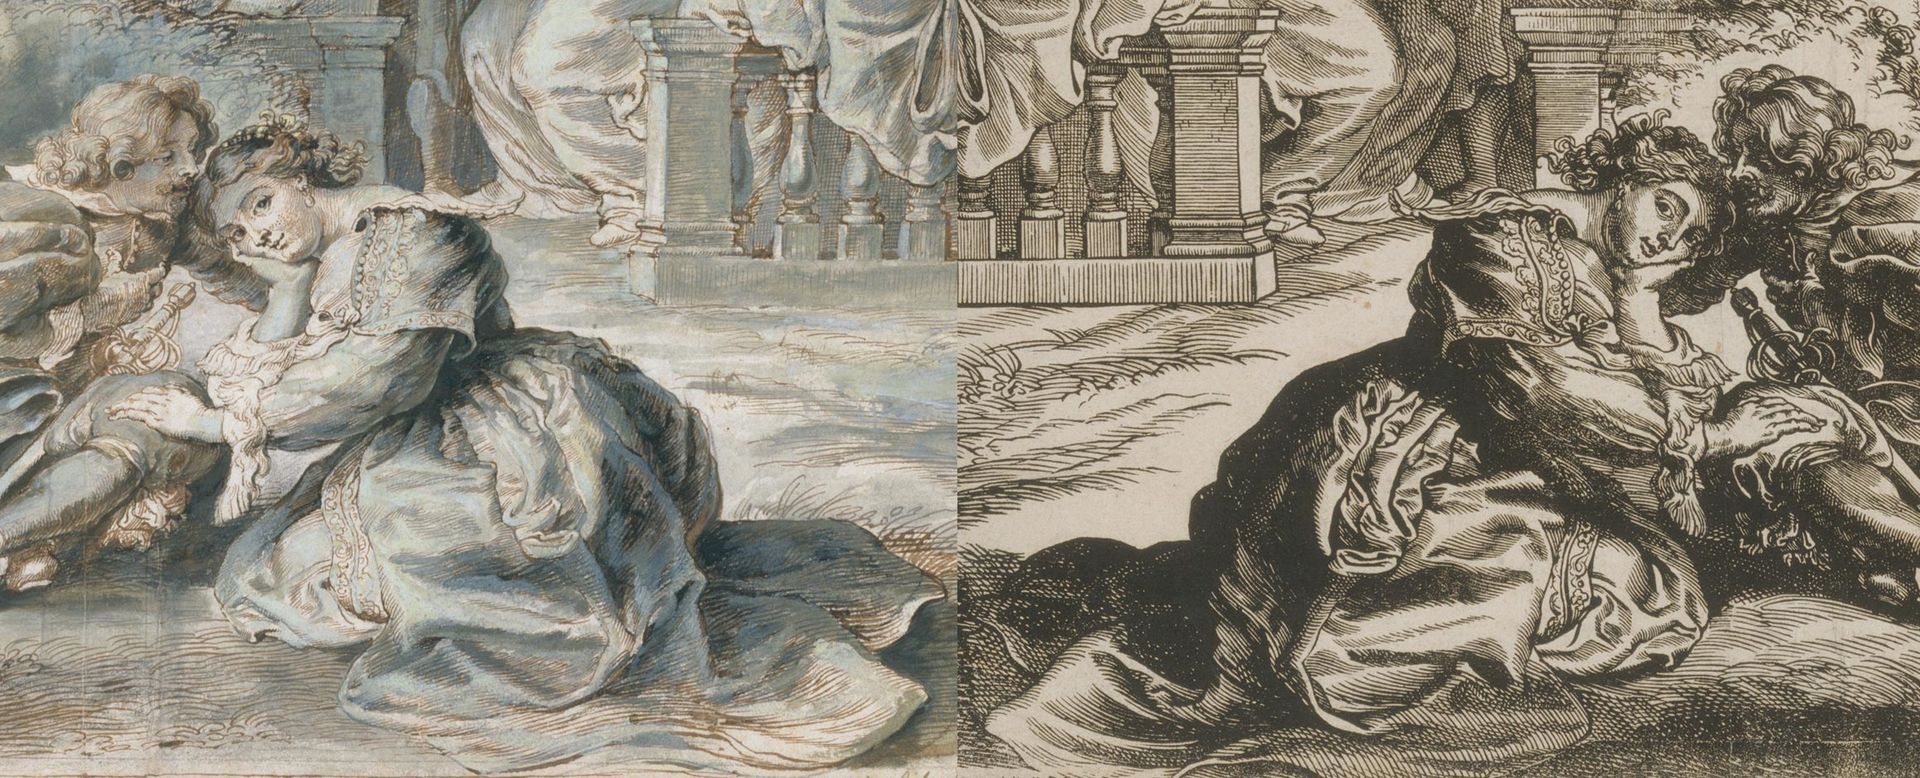 Composite image showing a drawing of two young lovers by Peter Paul Rubens (left) and a print of an identical image by the same artist (right)